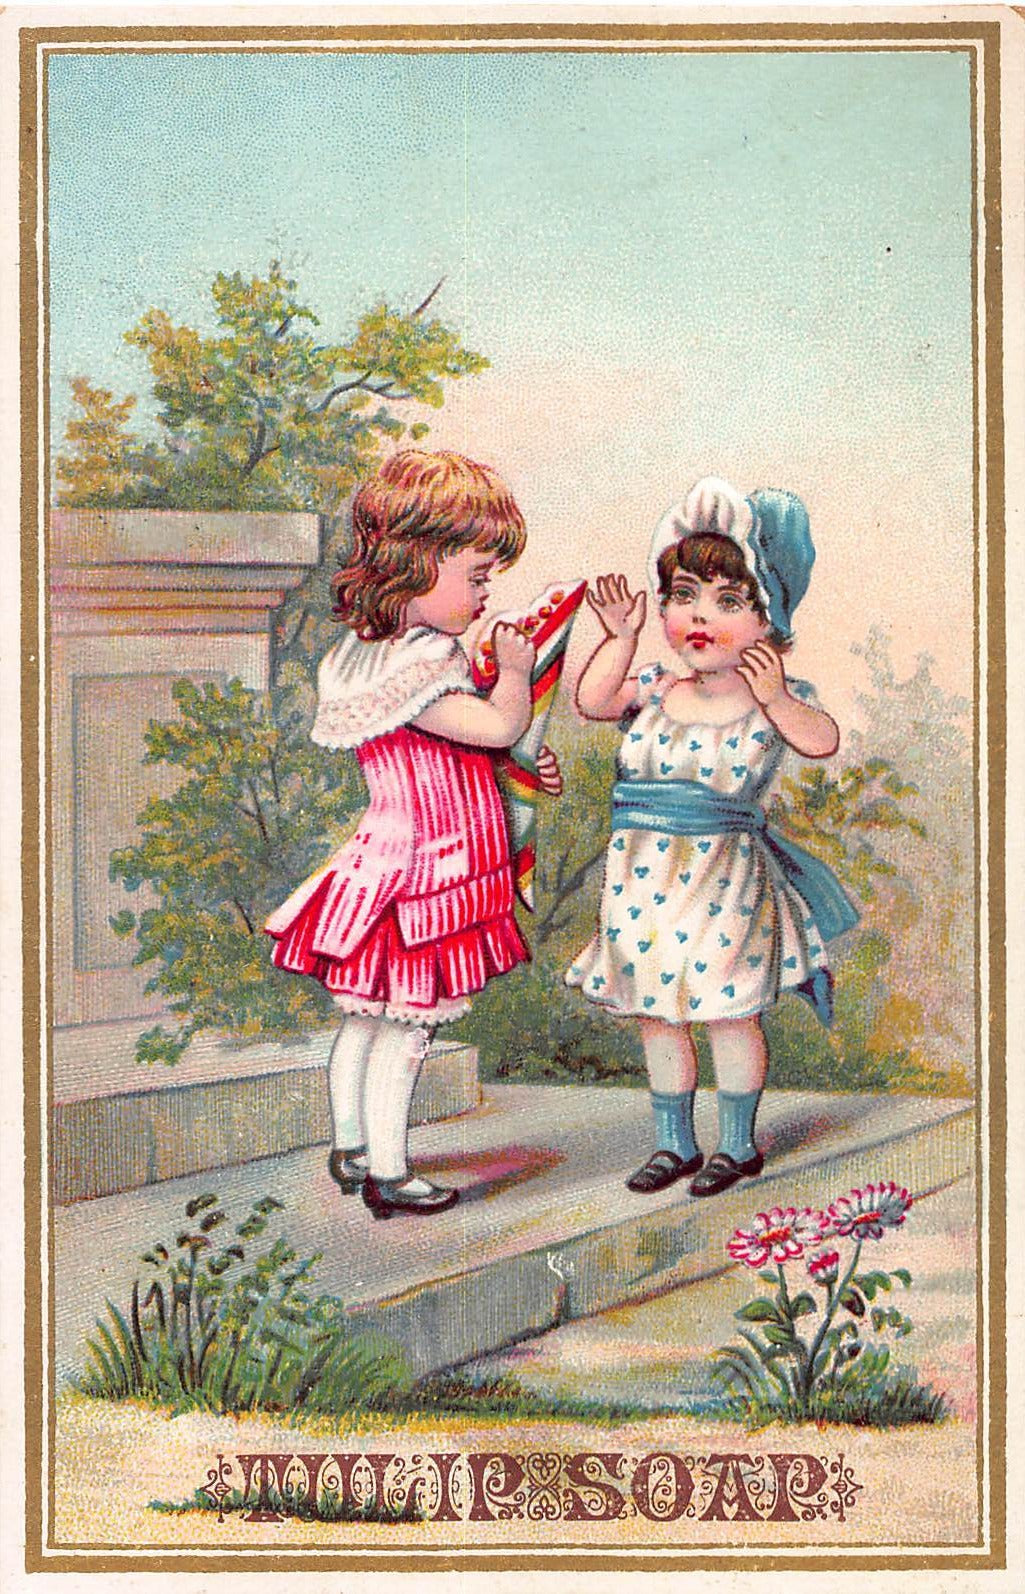 Tulip Soap, 19th Century Embossed Trade Card, Size:  133 mm. x 88 mm.